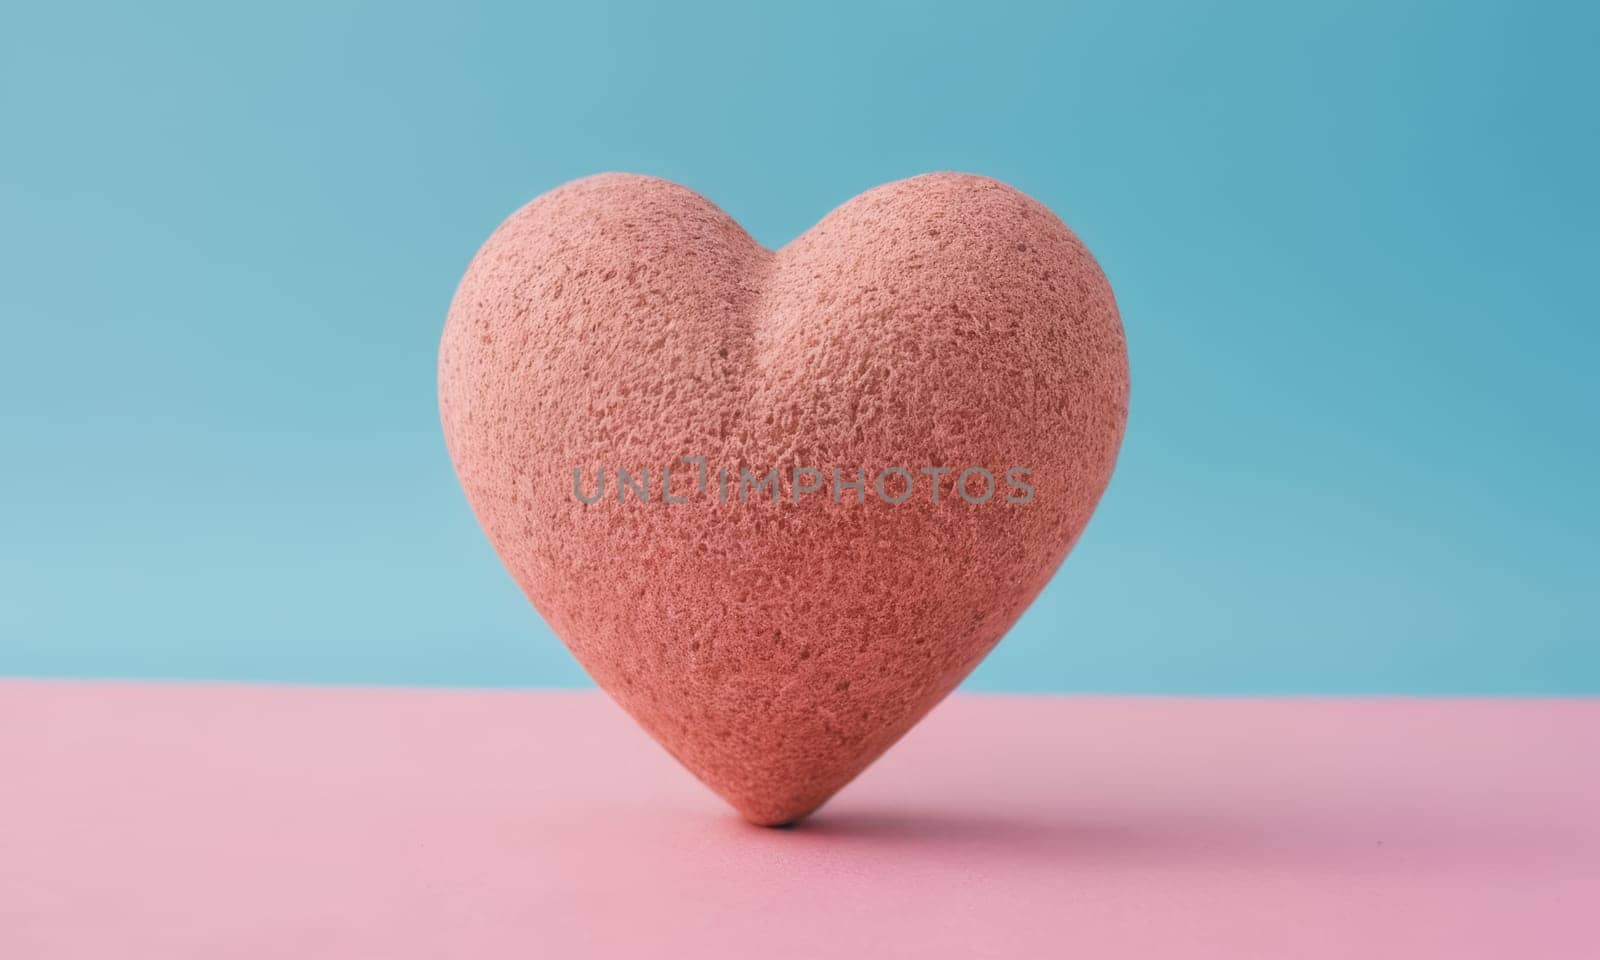 Textured heart shape on pastel background by Andre1ns